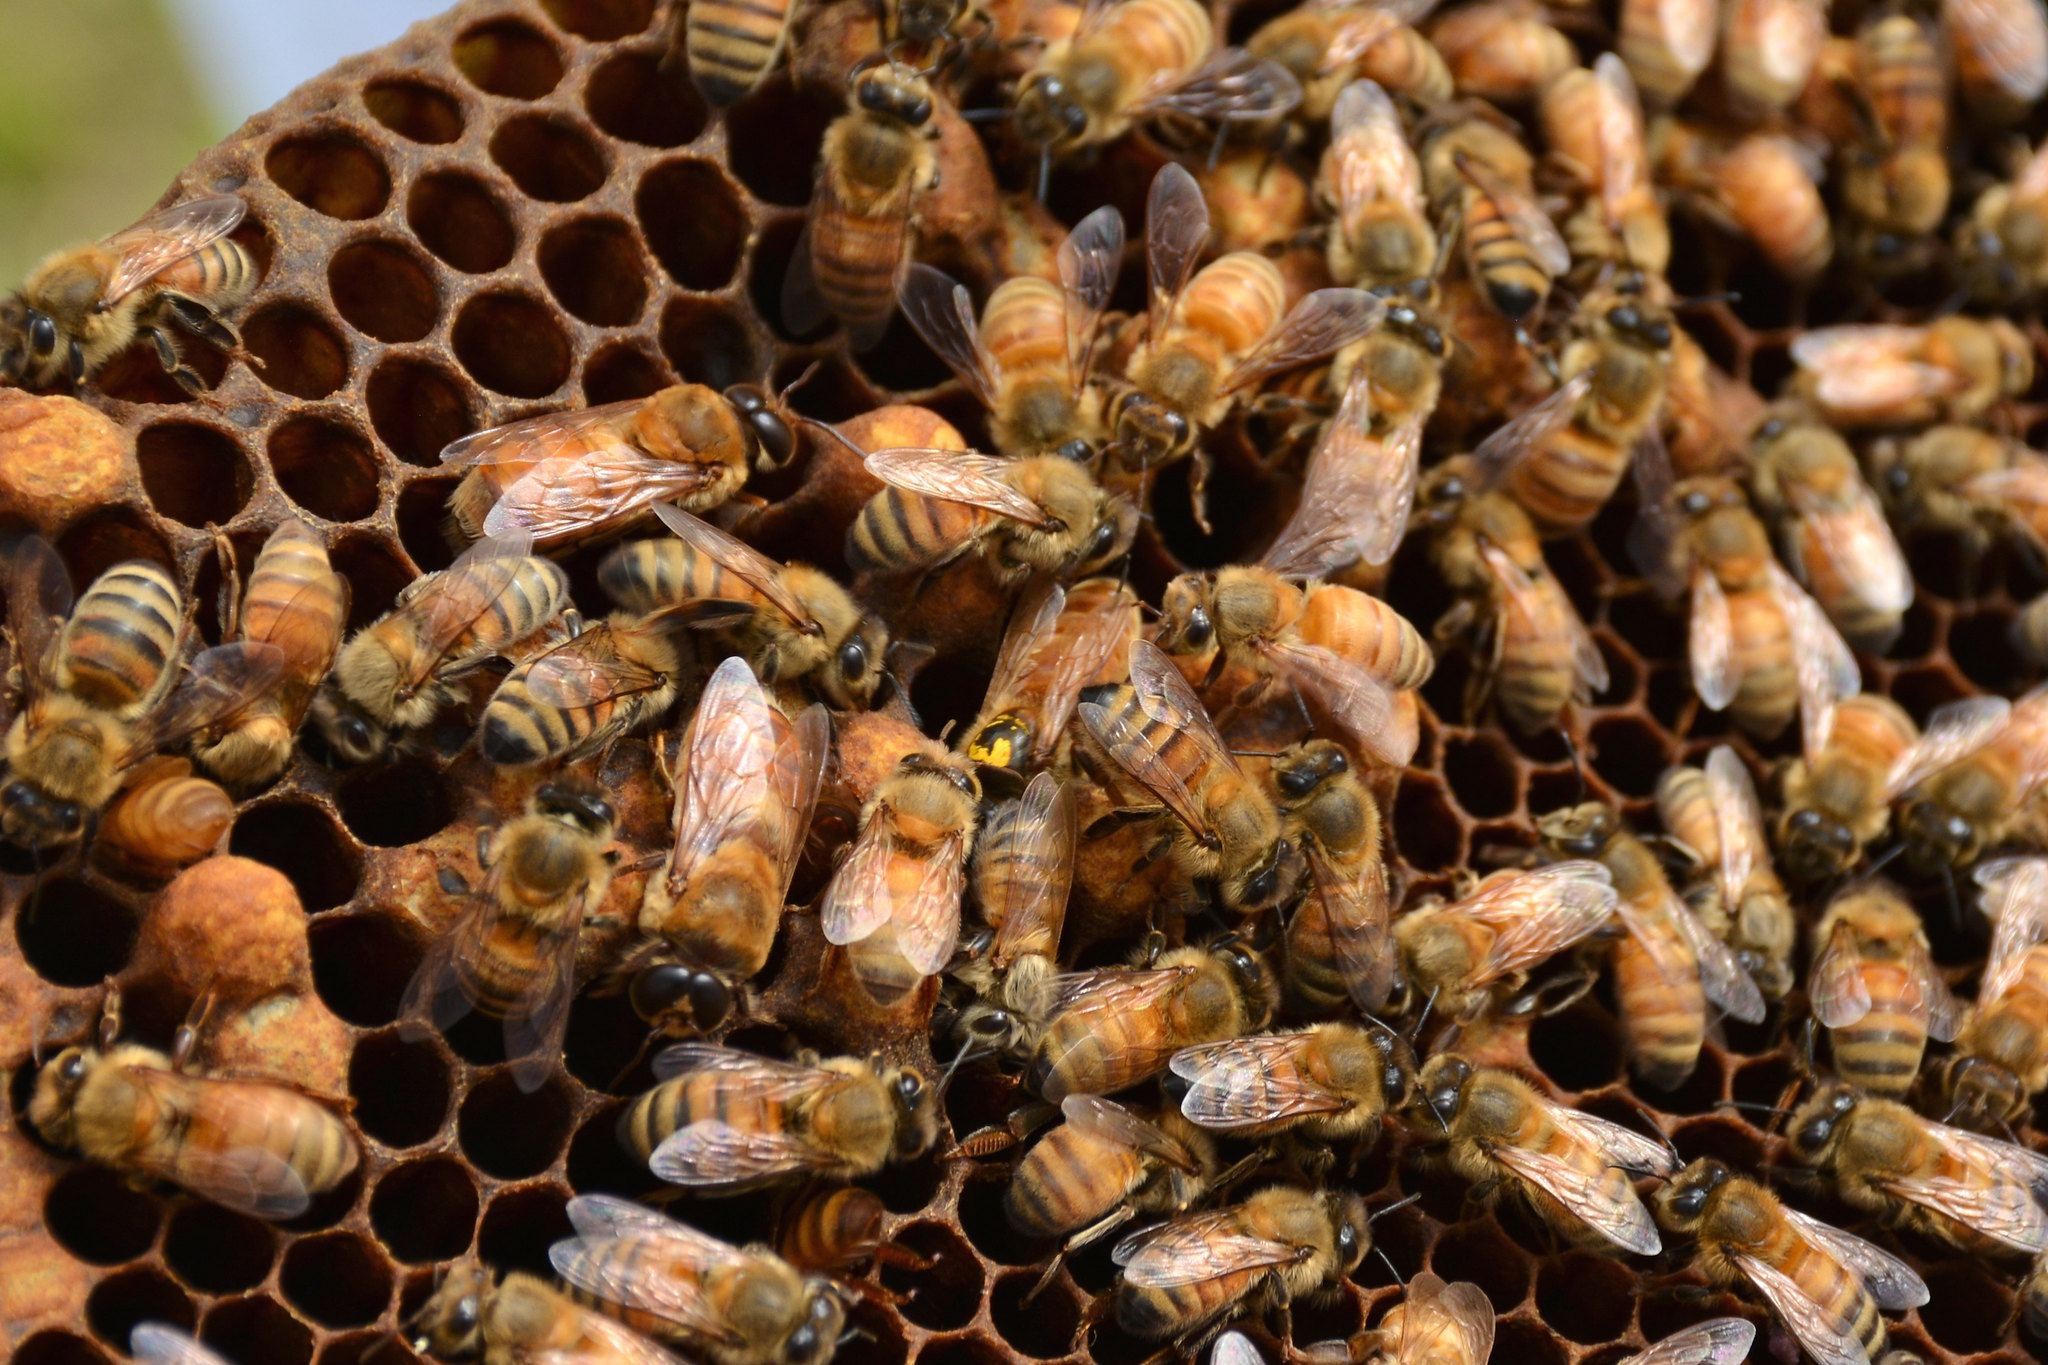 A swarm of honeybees can have the same electrical charge as a storm cloud